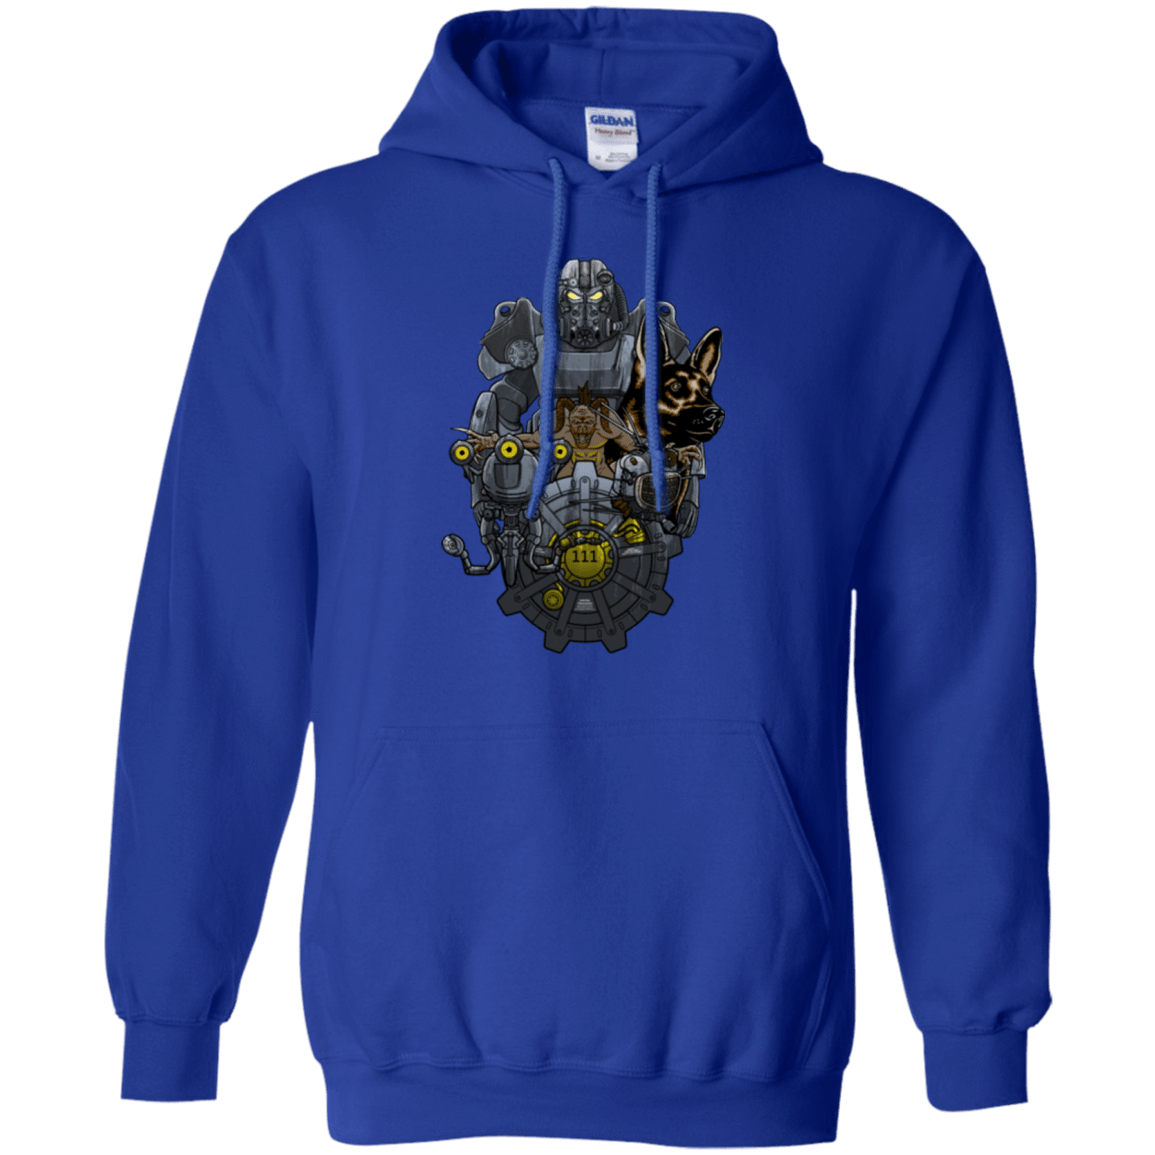 Sweatshirts Royal / Small Welcome home Pullover Hoodie